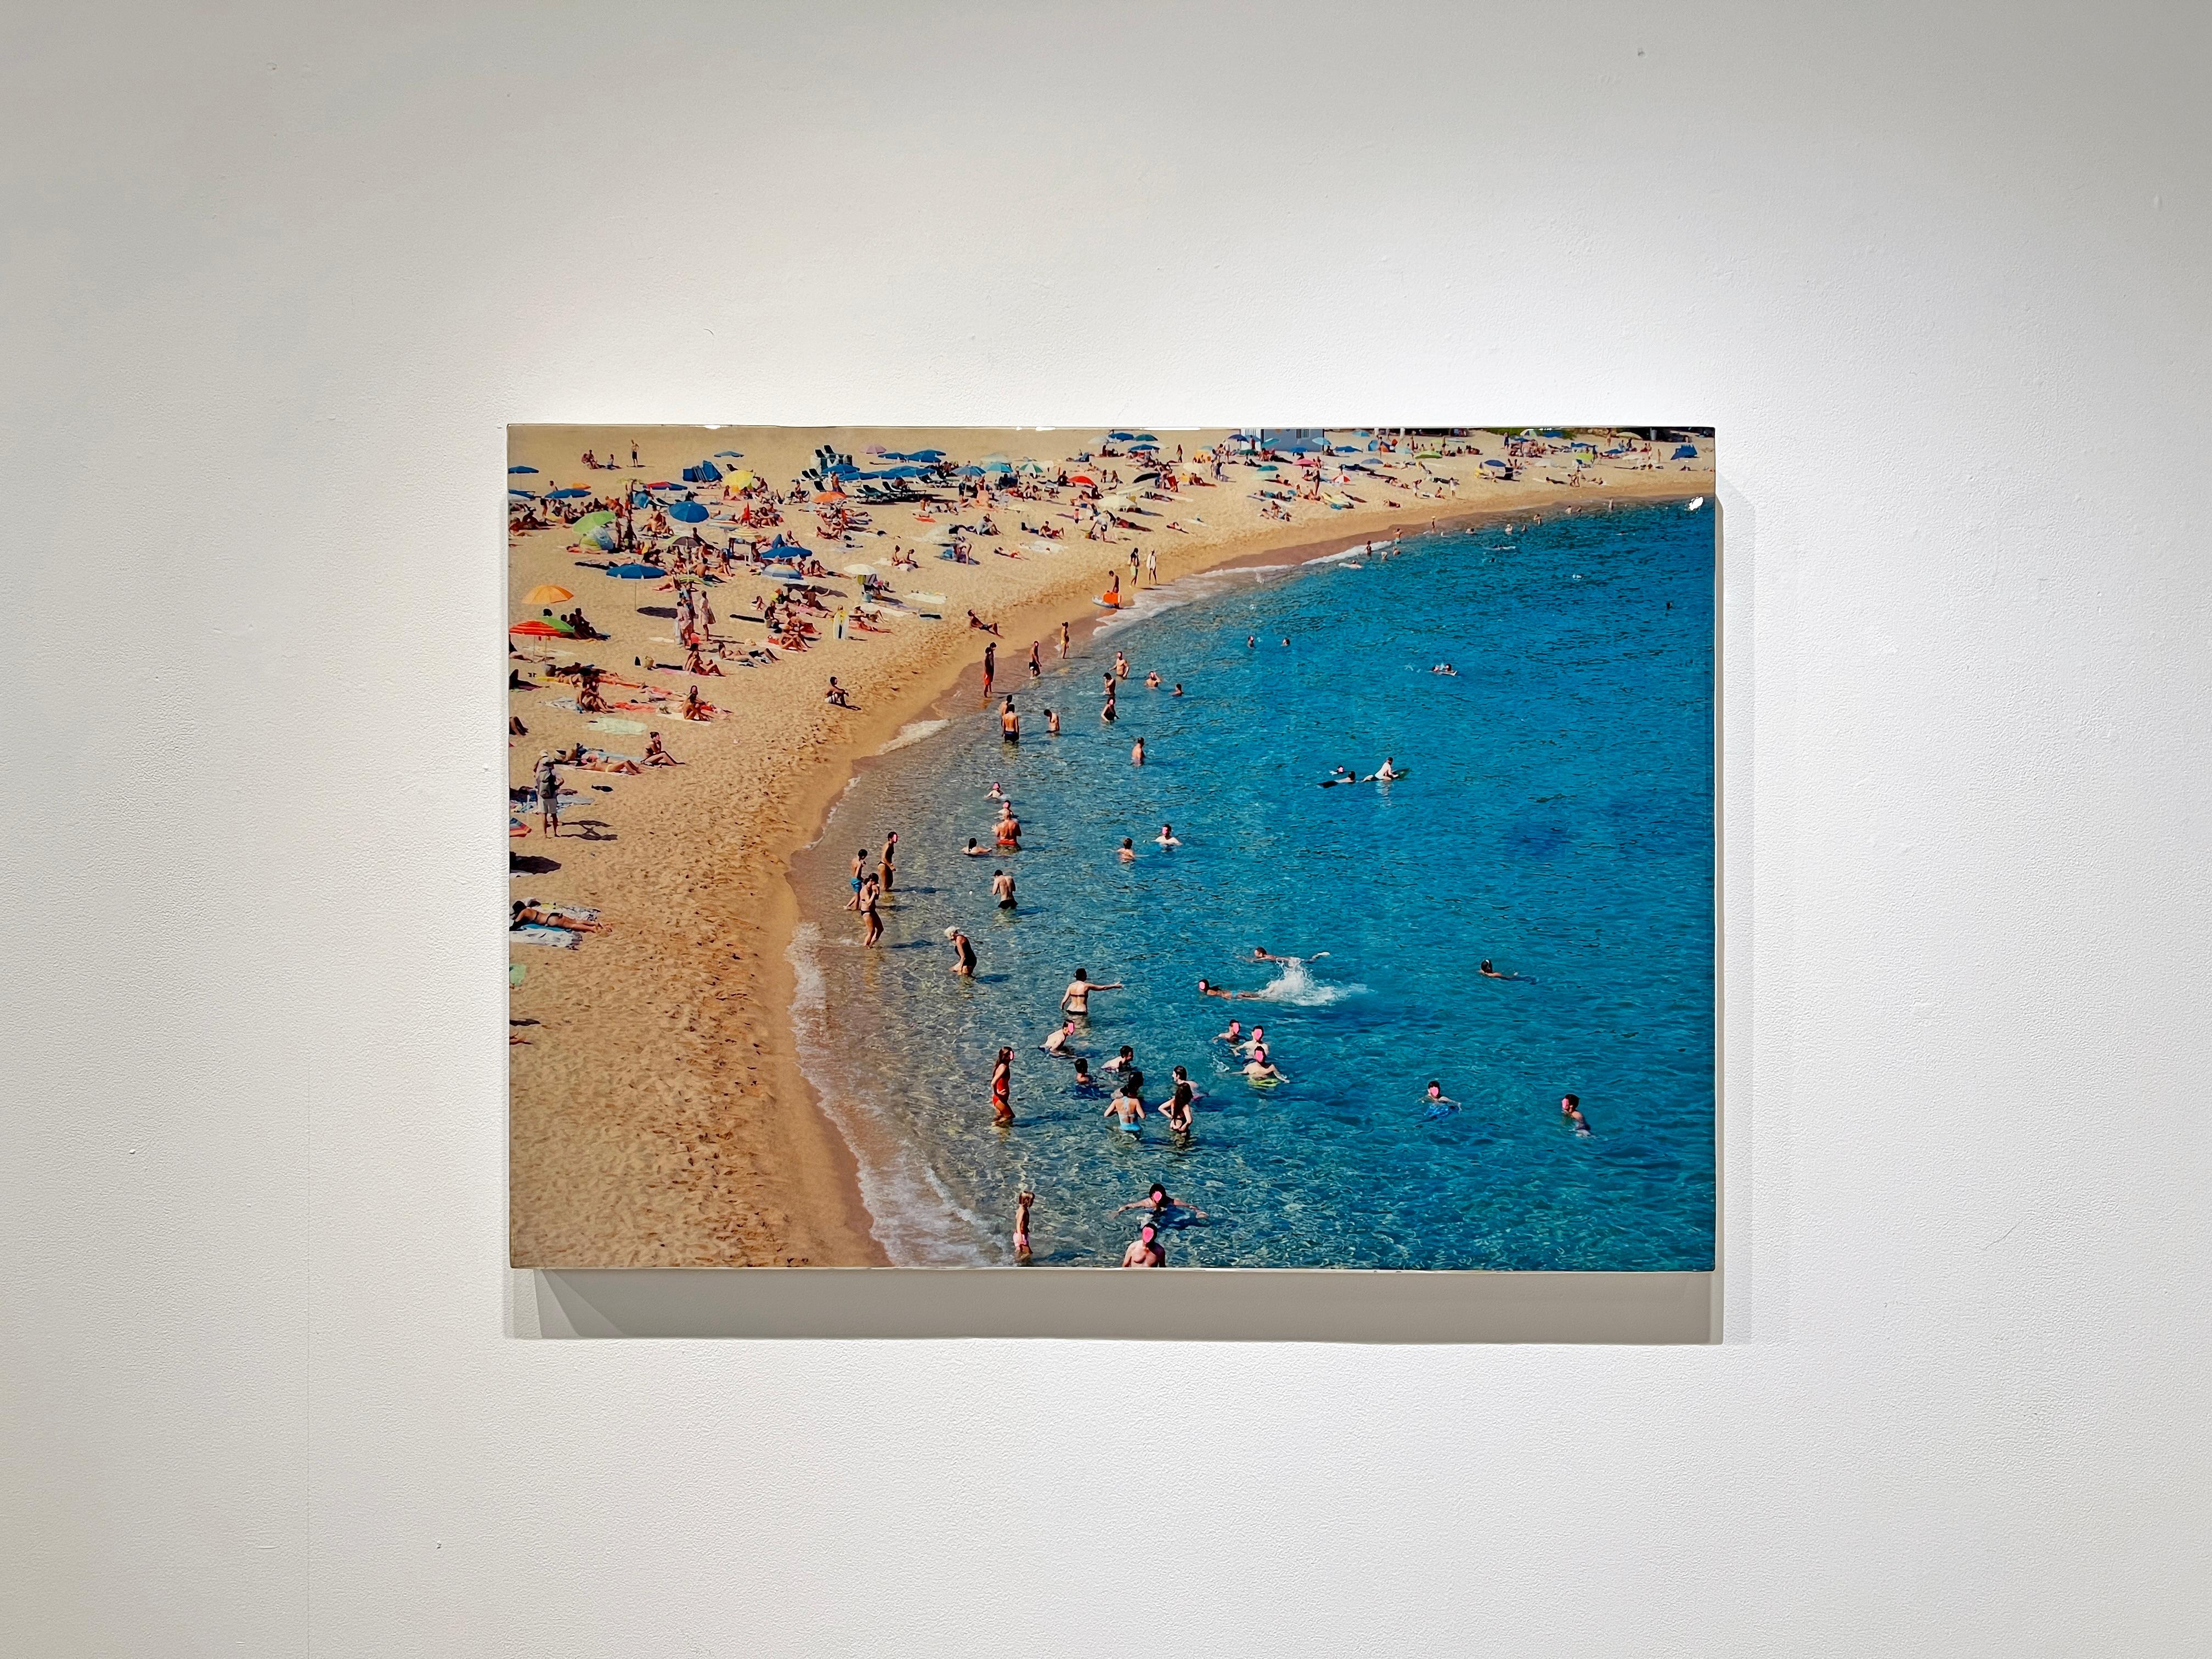 Depicts a sandy beach populated with swimmers and sunbathers. 

Mixed media artwork by Eric Zener. Employing a multi-layered materials process, Zener has combined hand gilding, resin pours, photography, and oil or ink printing, achieving a depth and